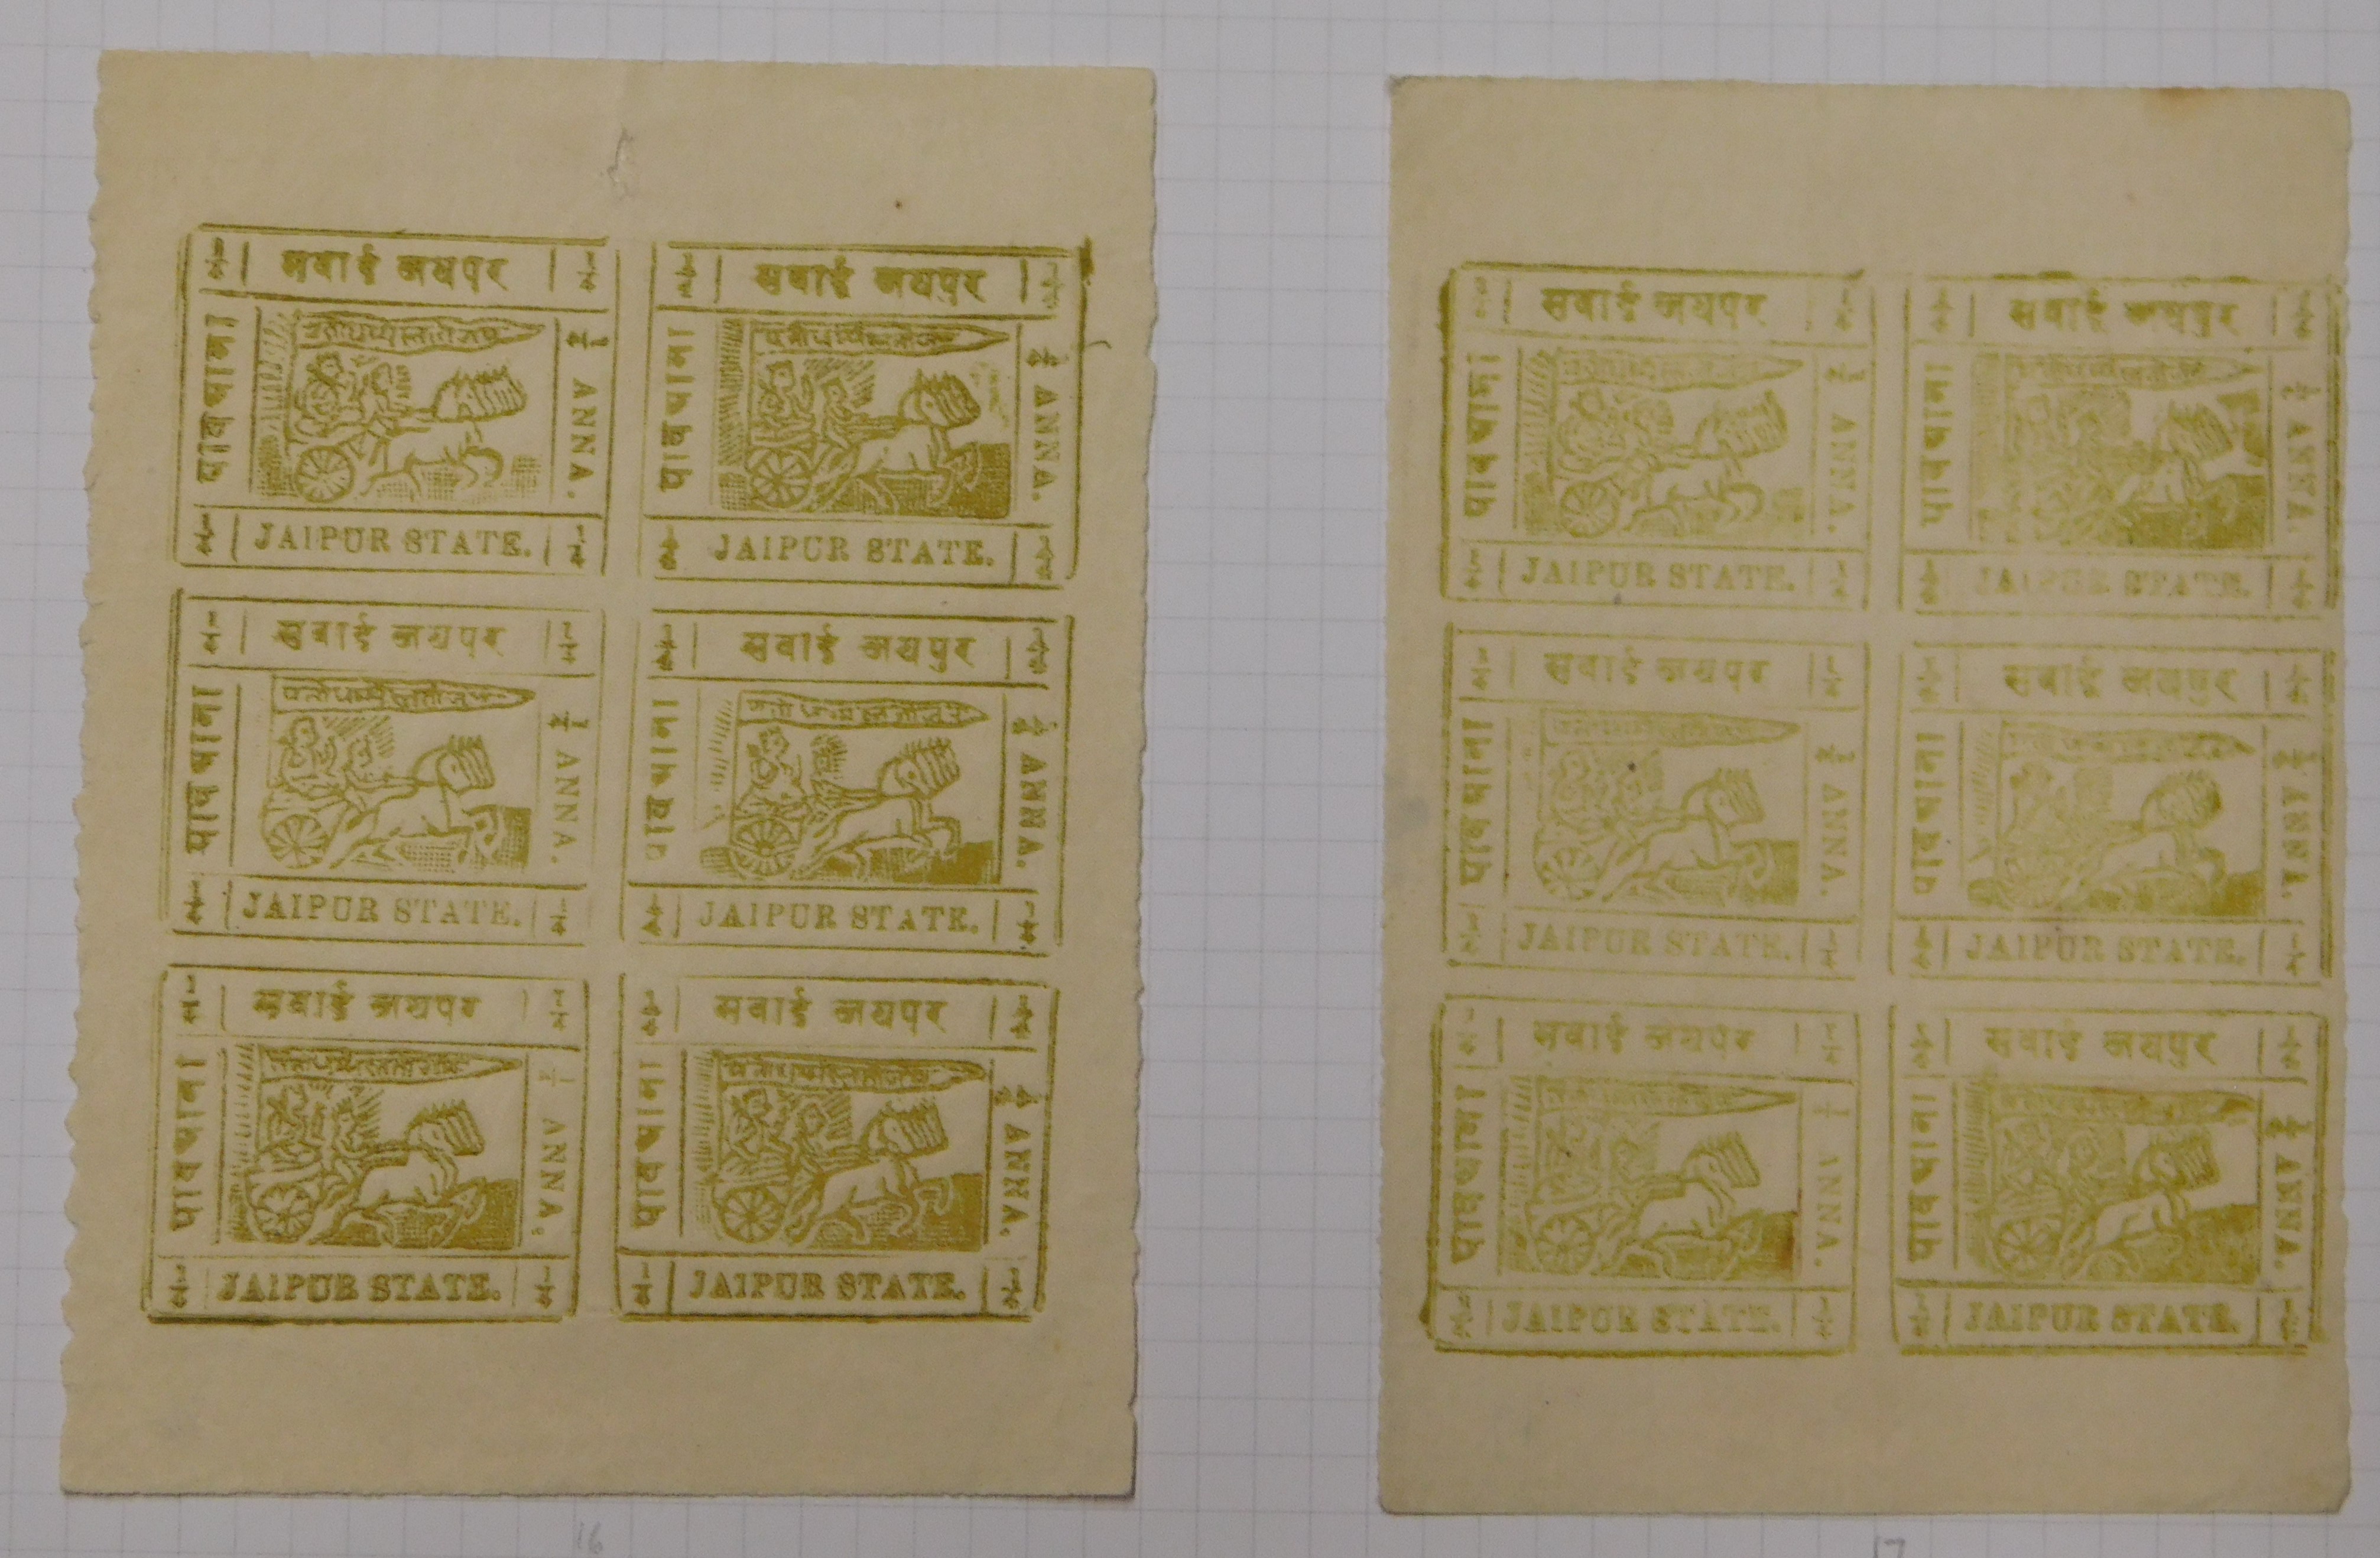 India (Jaipur) 1911 m/mint with 1/4 Anna, SG 16; SG 17 in sheetlets of four, SG 18 Printed double - Image 6 of 6